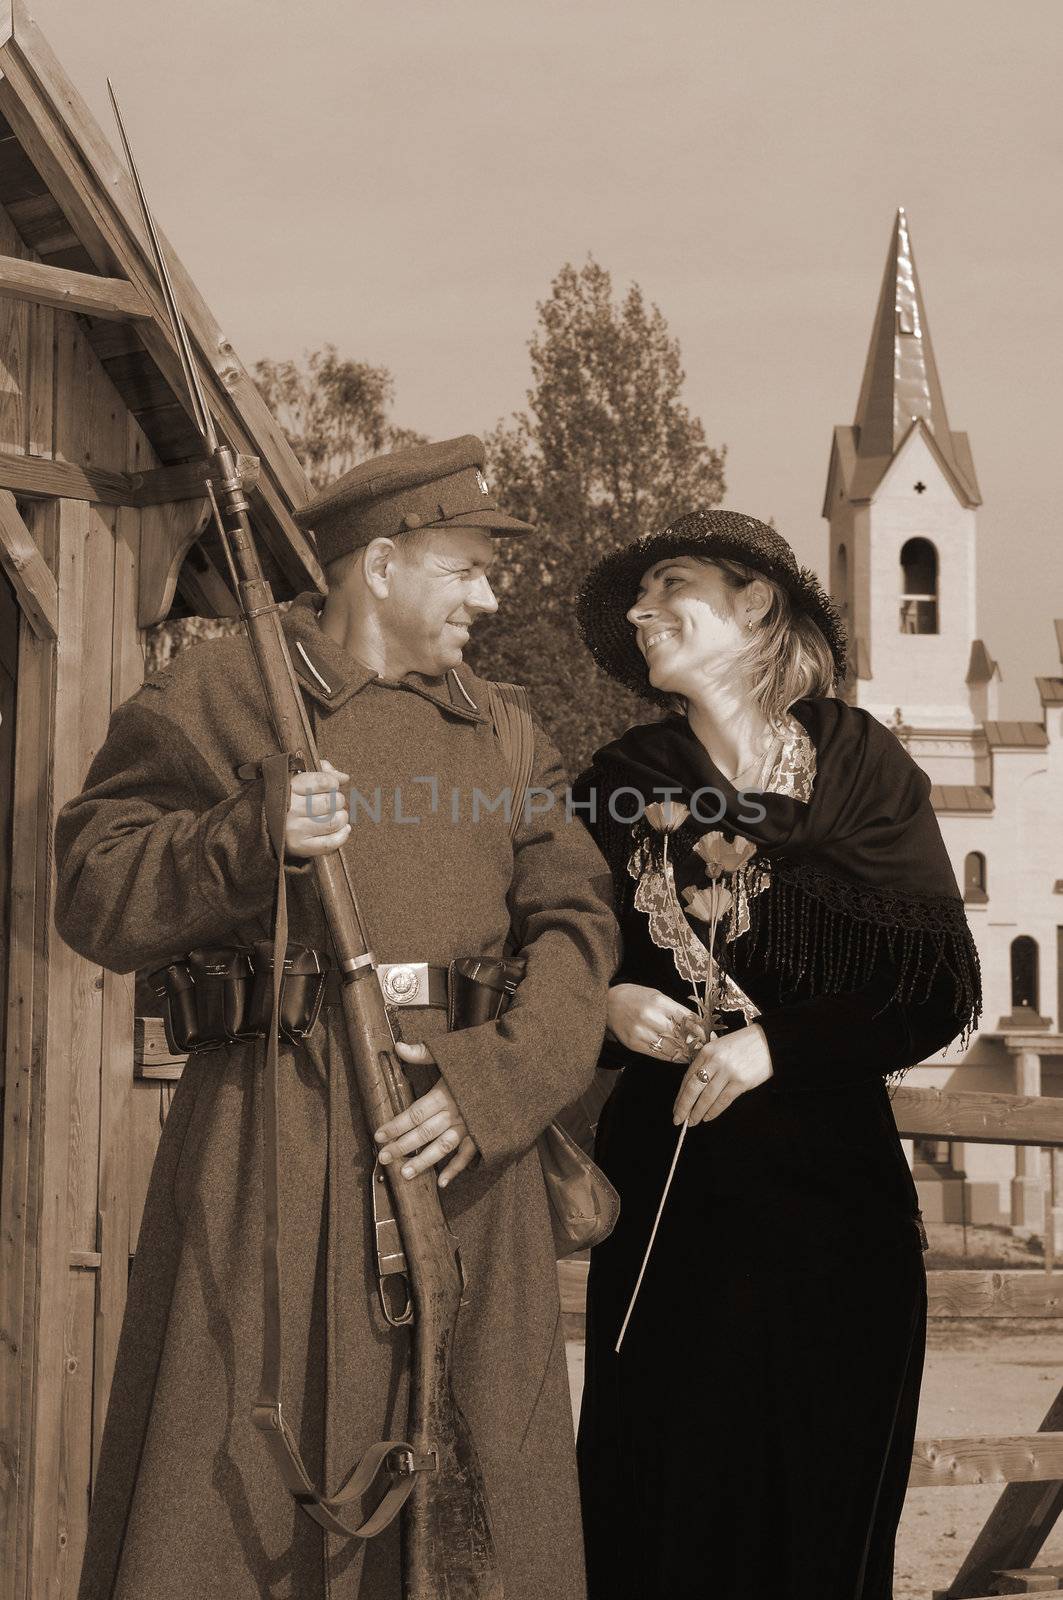 Old style picture with woman in dress and man in soldier uniform with weapon. Costumes are authentic to the ones weared in time of  World War I.